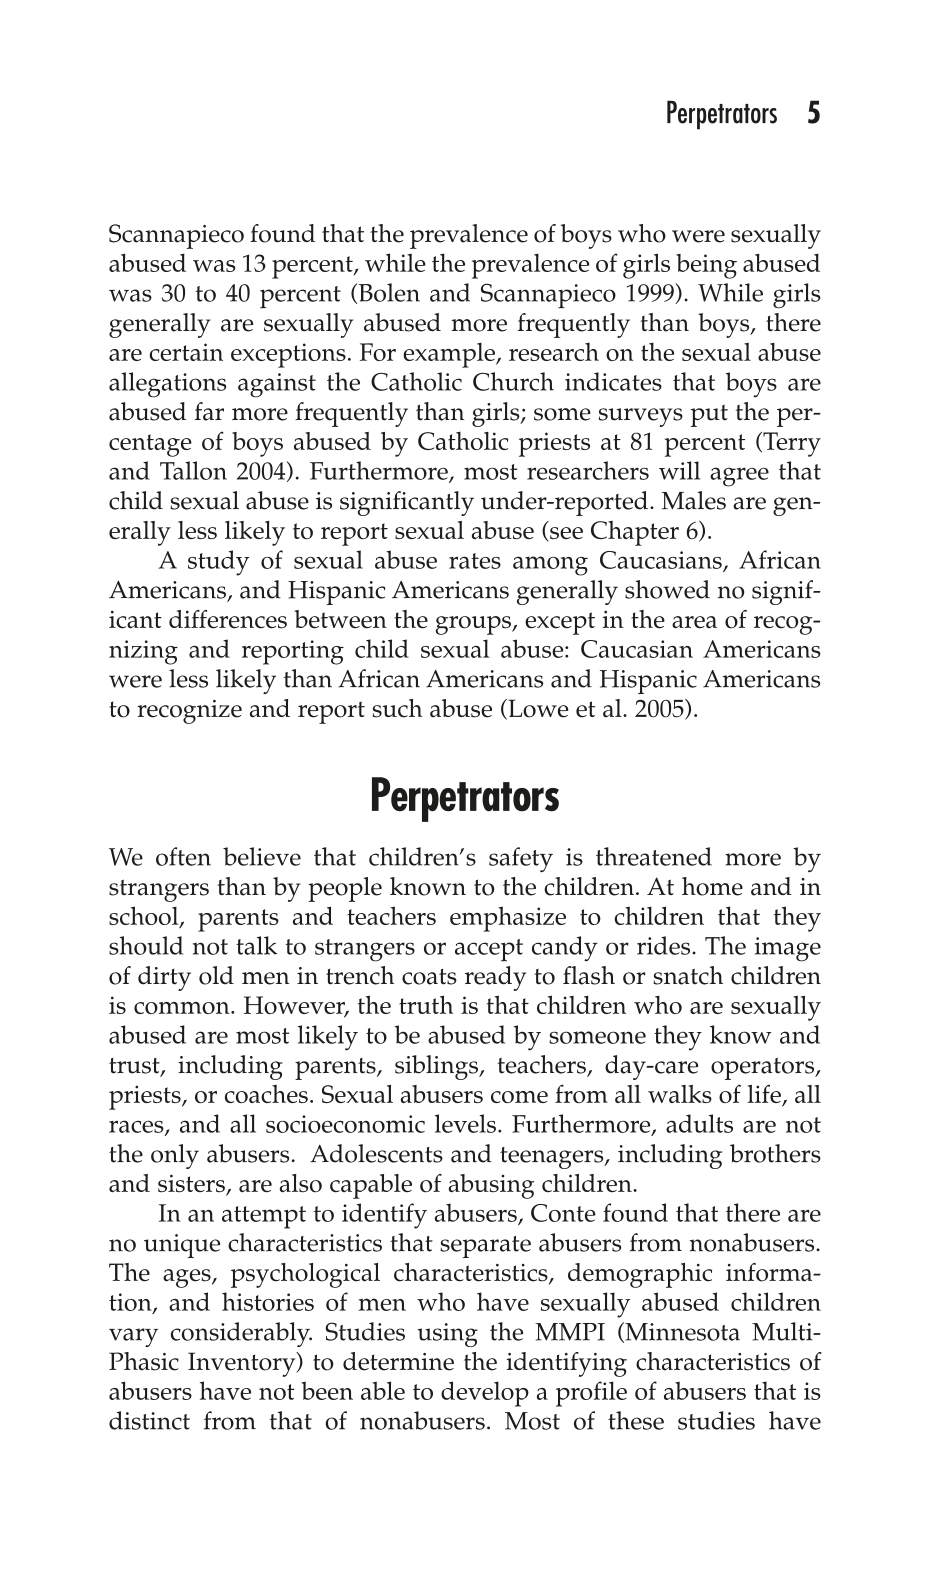 Childhood Sexual Abuse: A Reference Handbook, 2nd Edition page 5